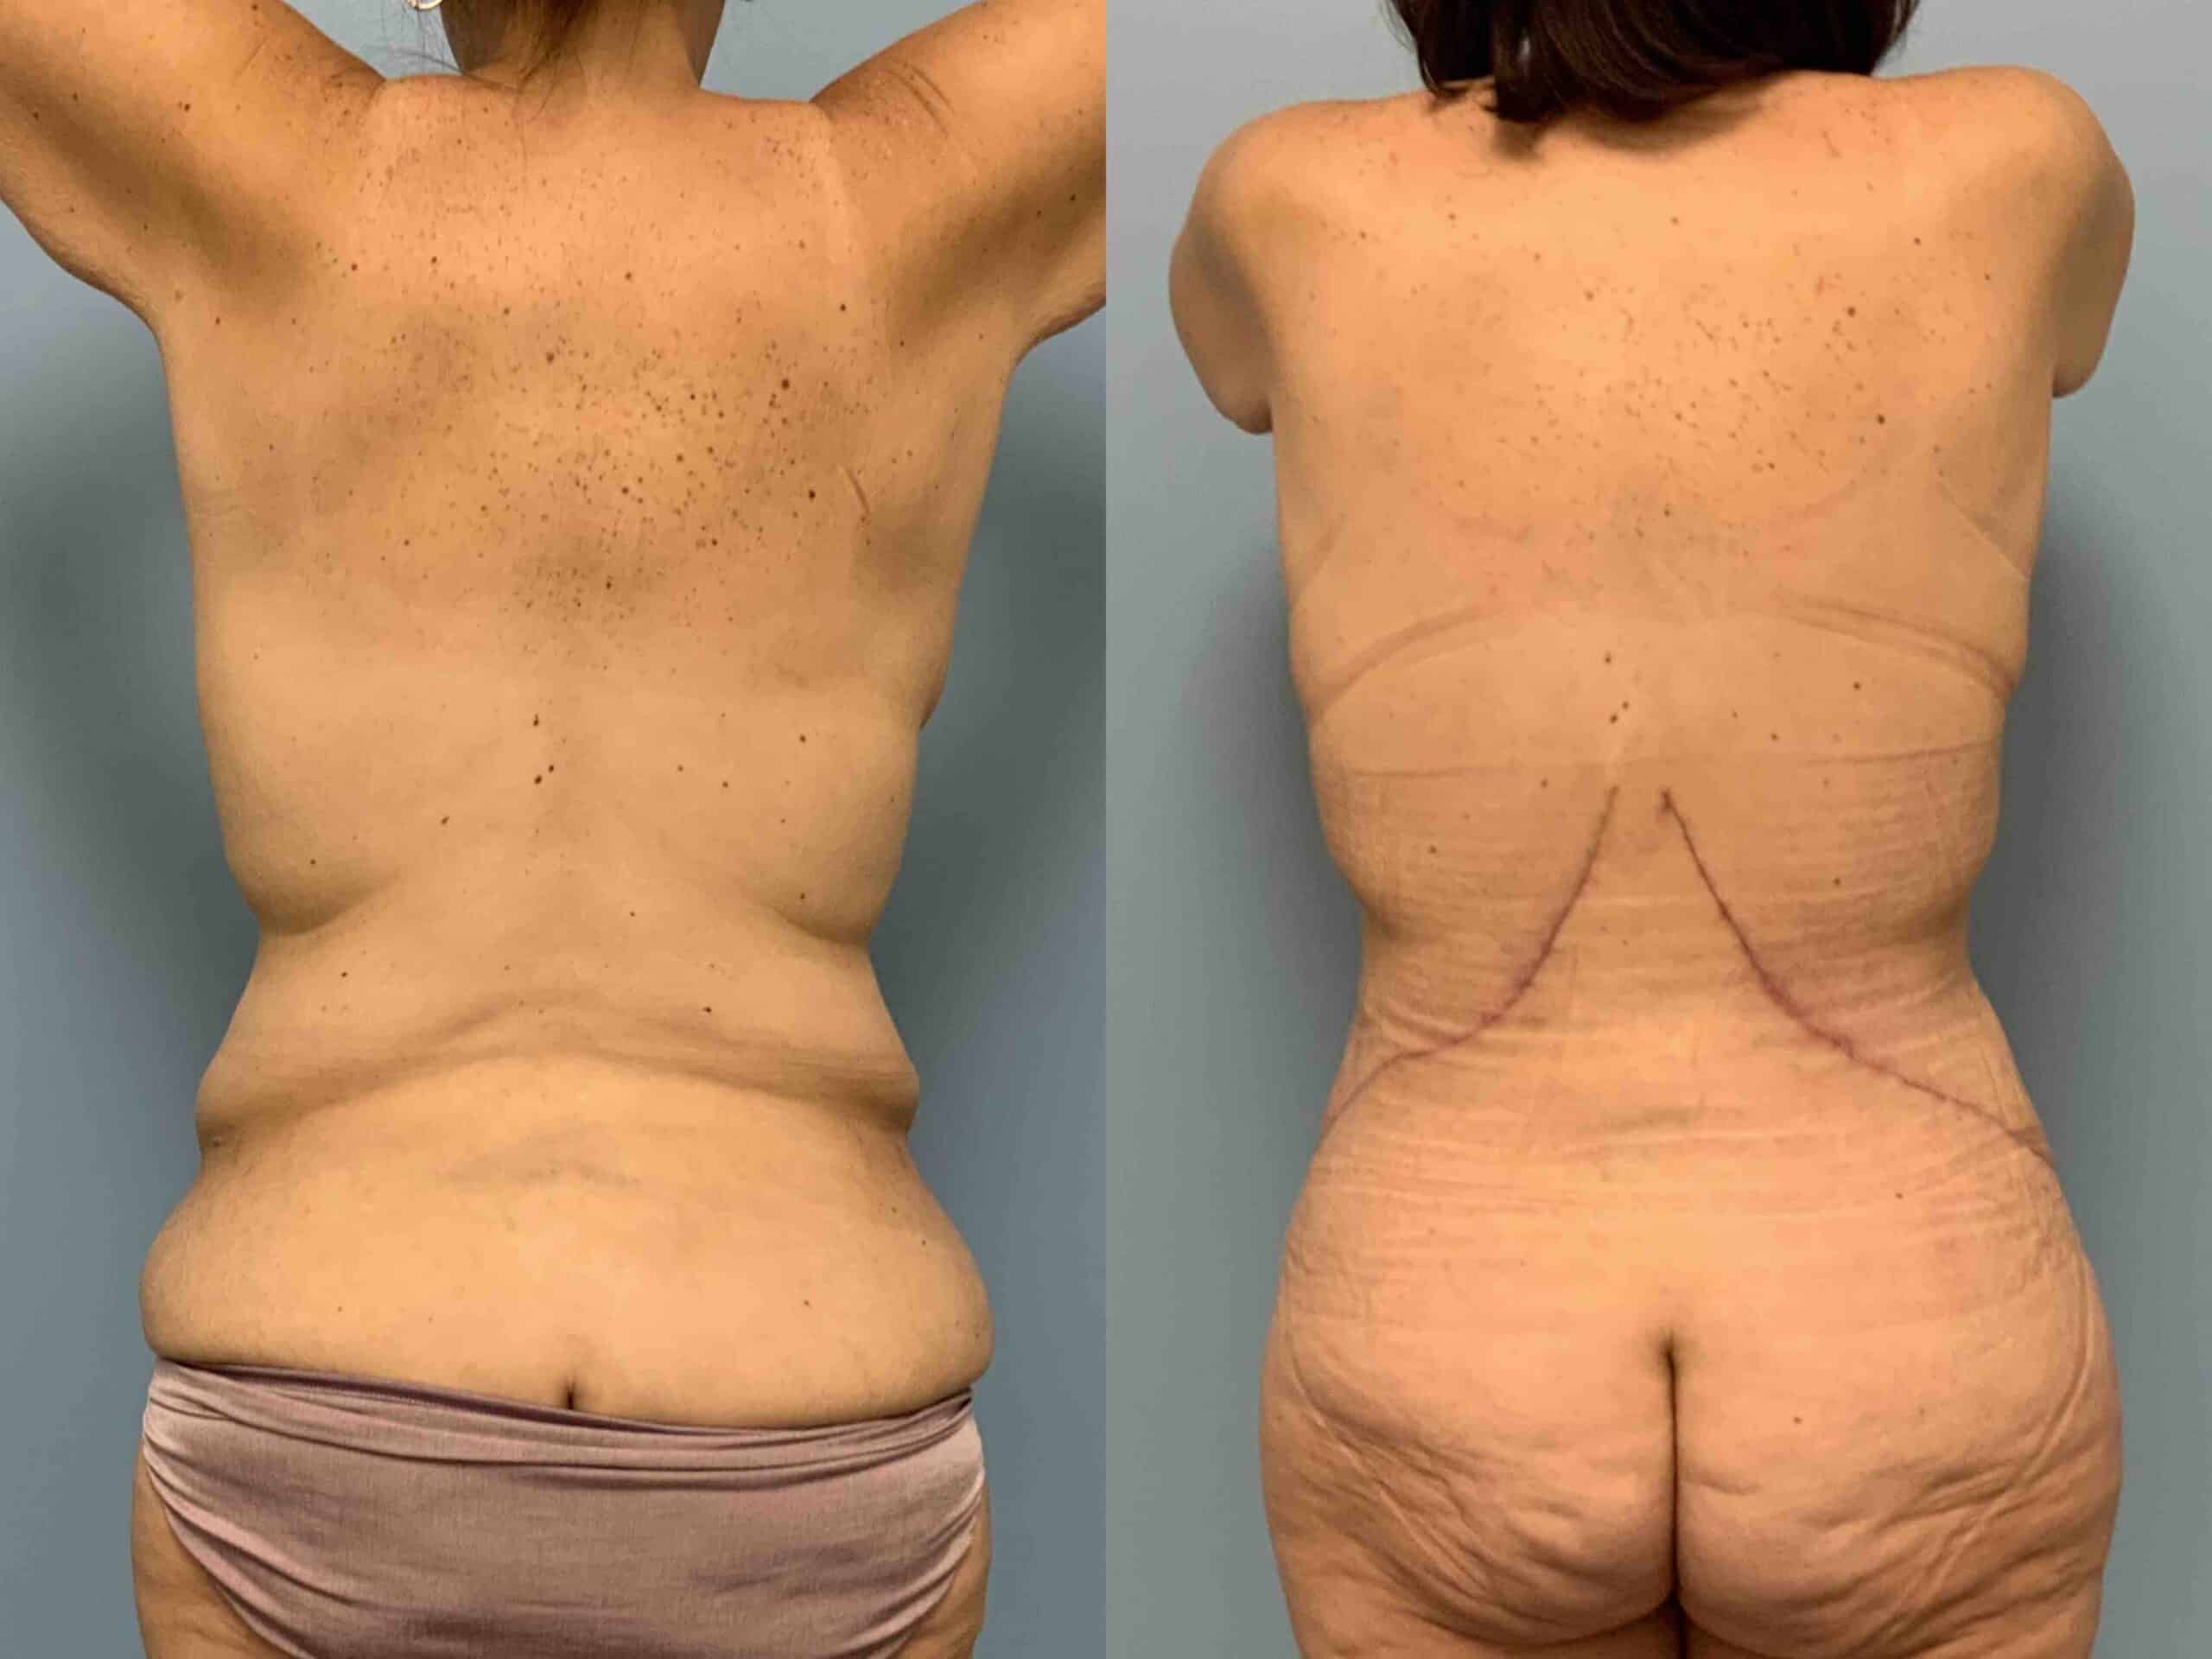 Before and after, 2 mo post op from Tummy Tuck, Belt Lipectomy, VASER Abdomen, Mons, Flanks Axilla, Axillary Roll Resection Breast Lift/Mastopexy, Breast Augmentation performed by Dr. Paul Vanek (back view)